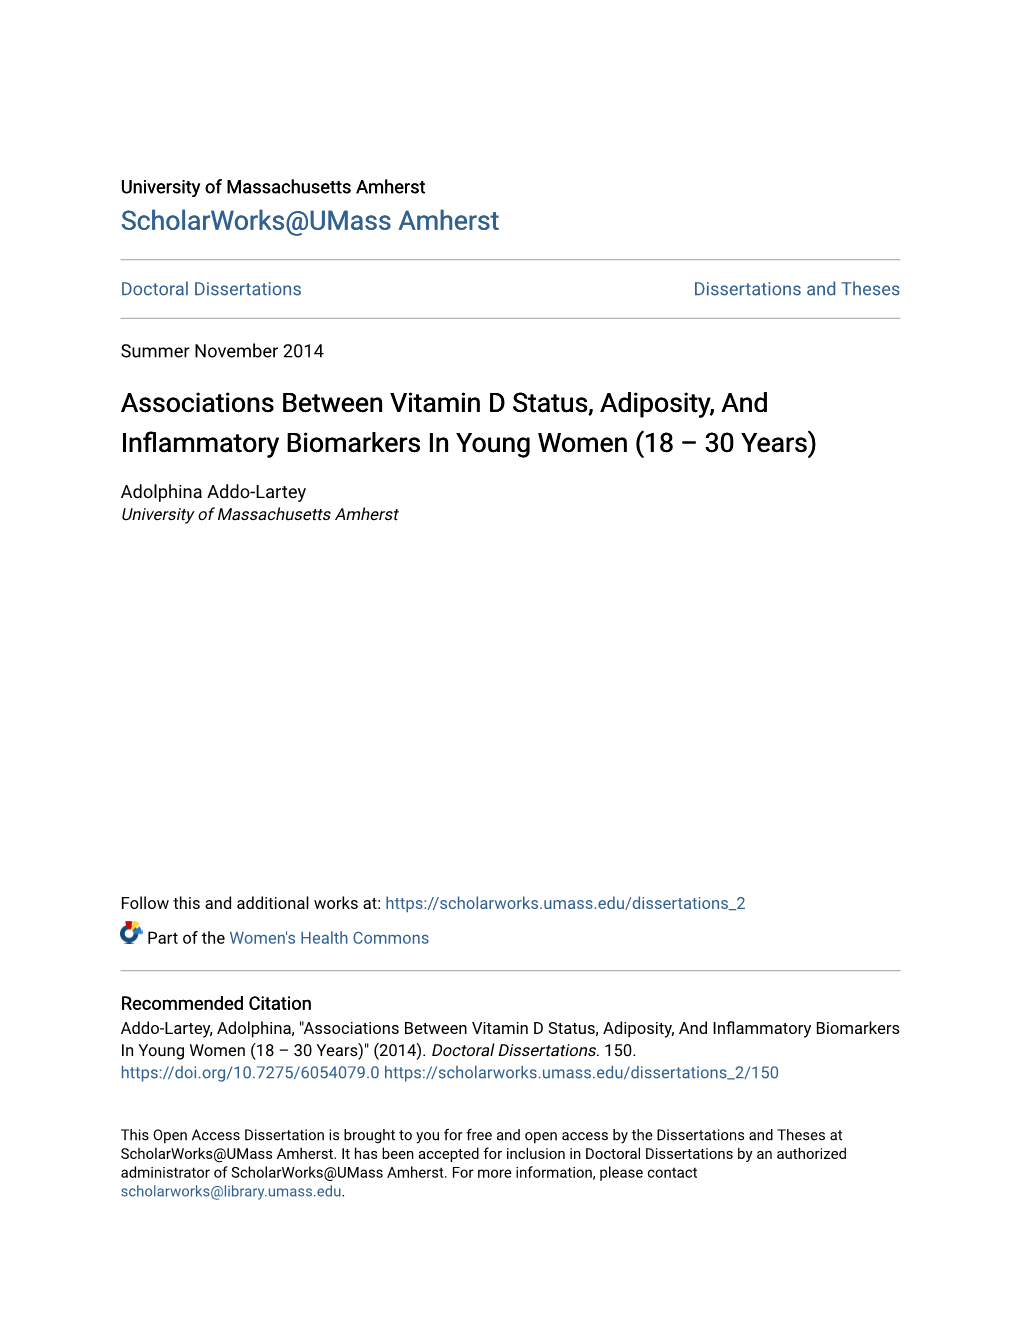 Associations Between Vitamin D Status, Adiposity, and Inflammatory Biomarkers in Young Women (18 – 30 Years)